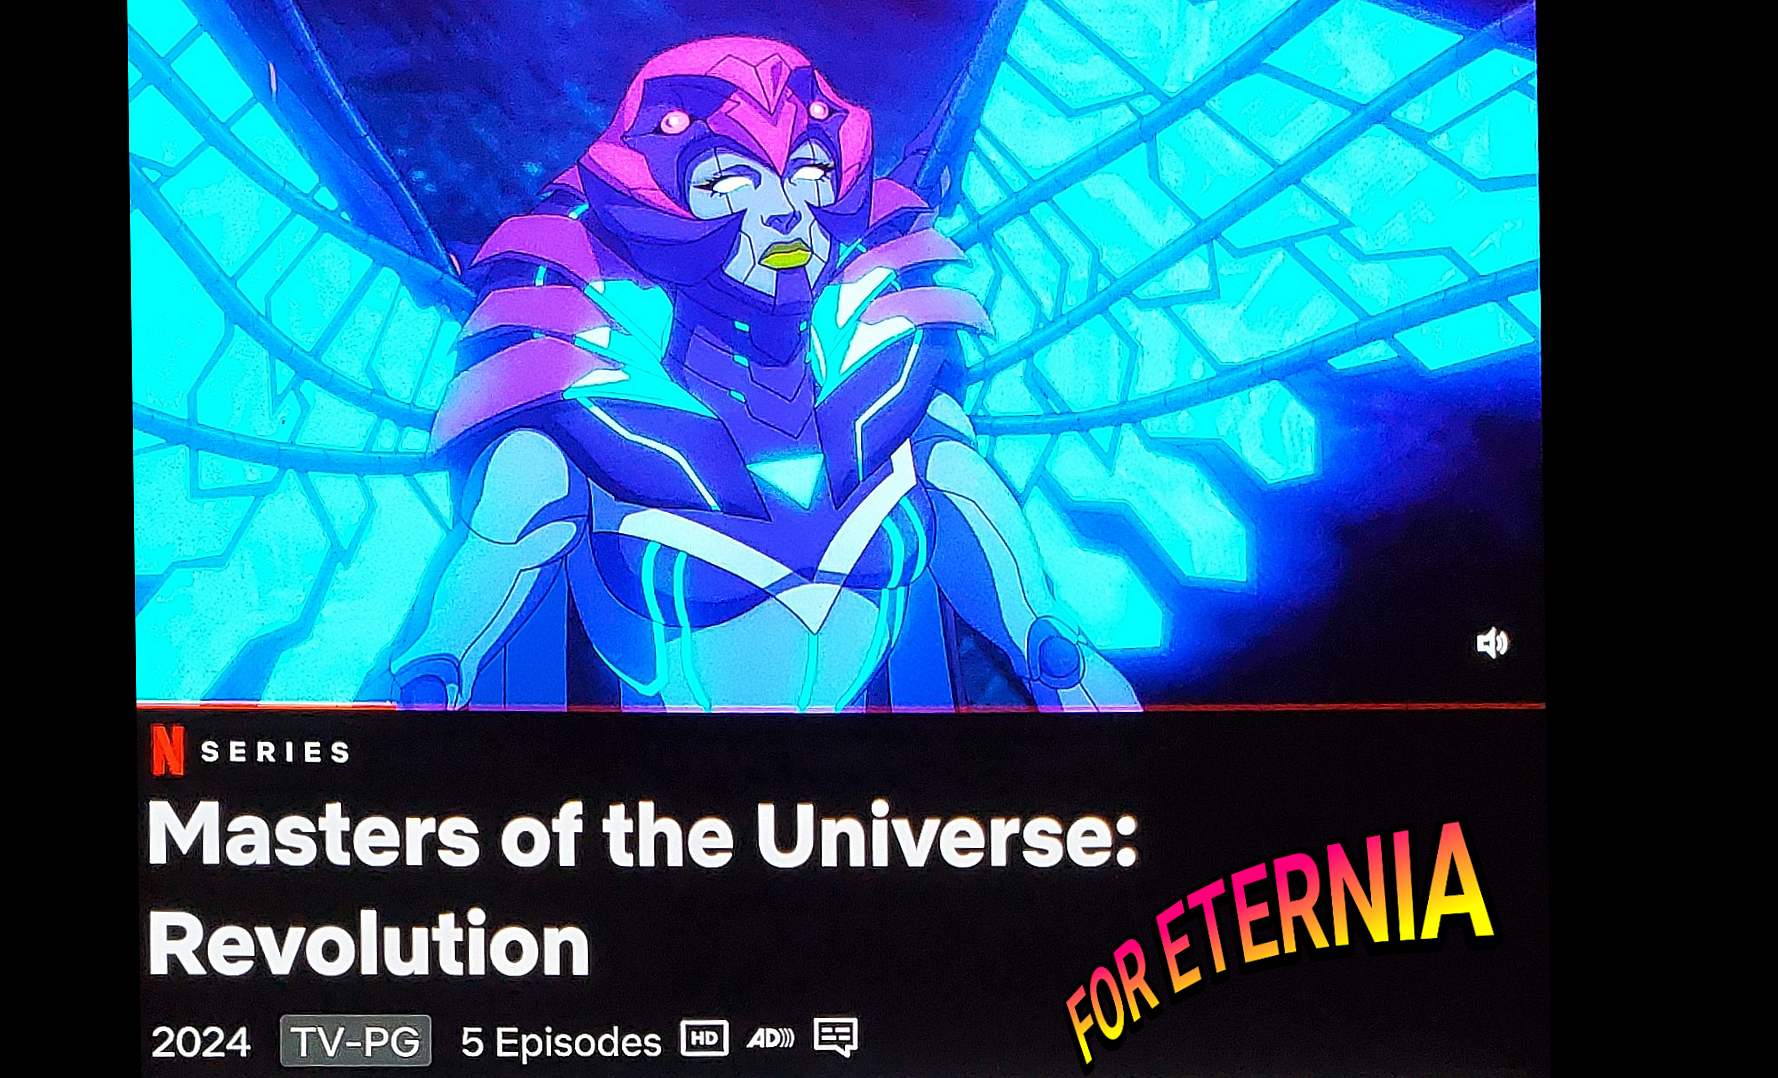 THE REVOLUTION BEGINS! ”Masters of the Universe: Revolution” is NOW Streaming on Netflix